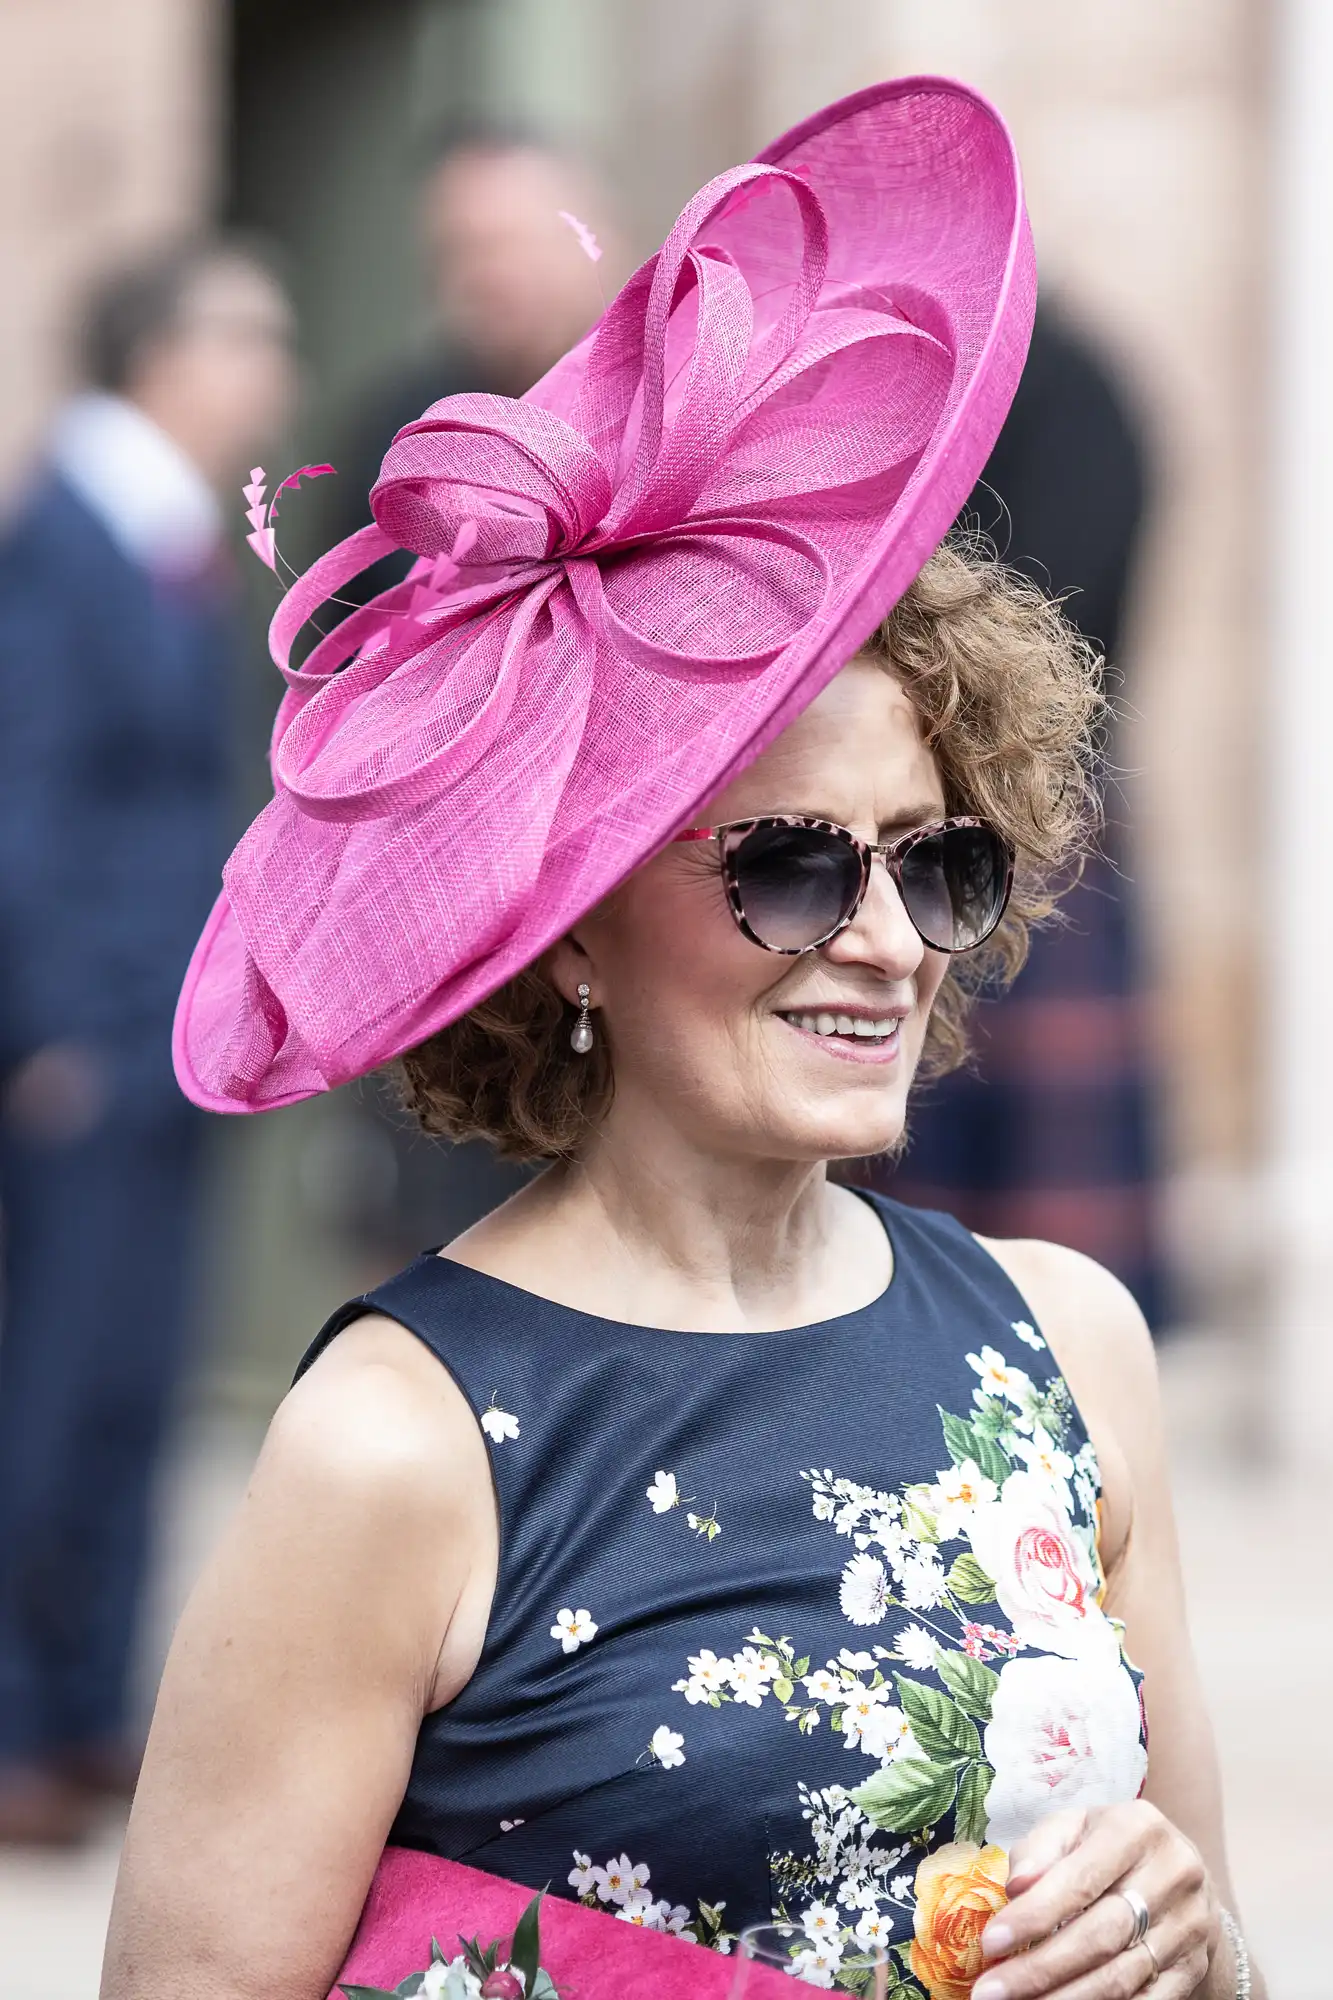 A woman with curly hair wearing a large pink hat and a floral dress smiles, holding a rose, outdoors at a formal event.